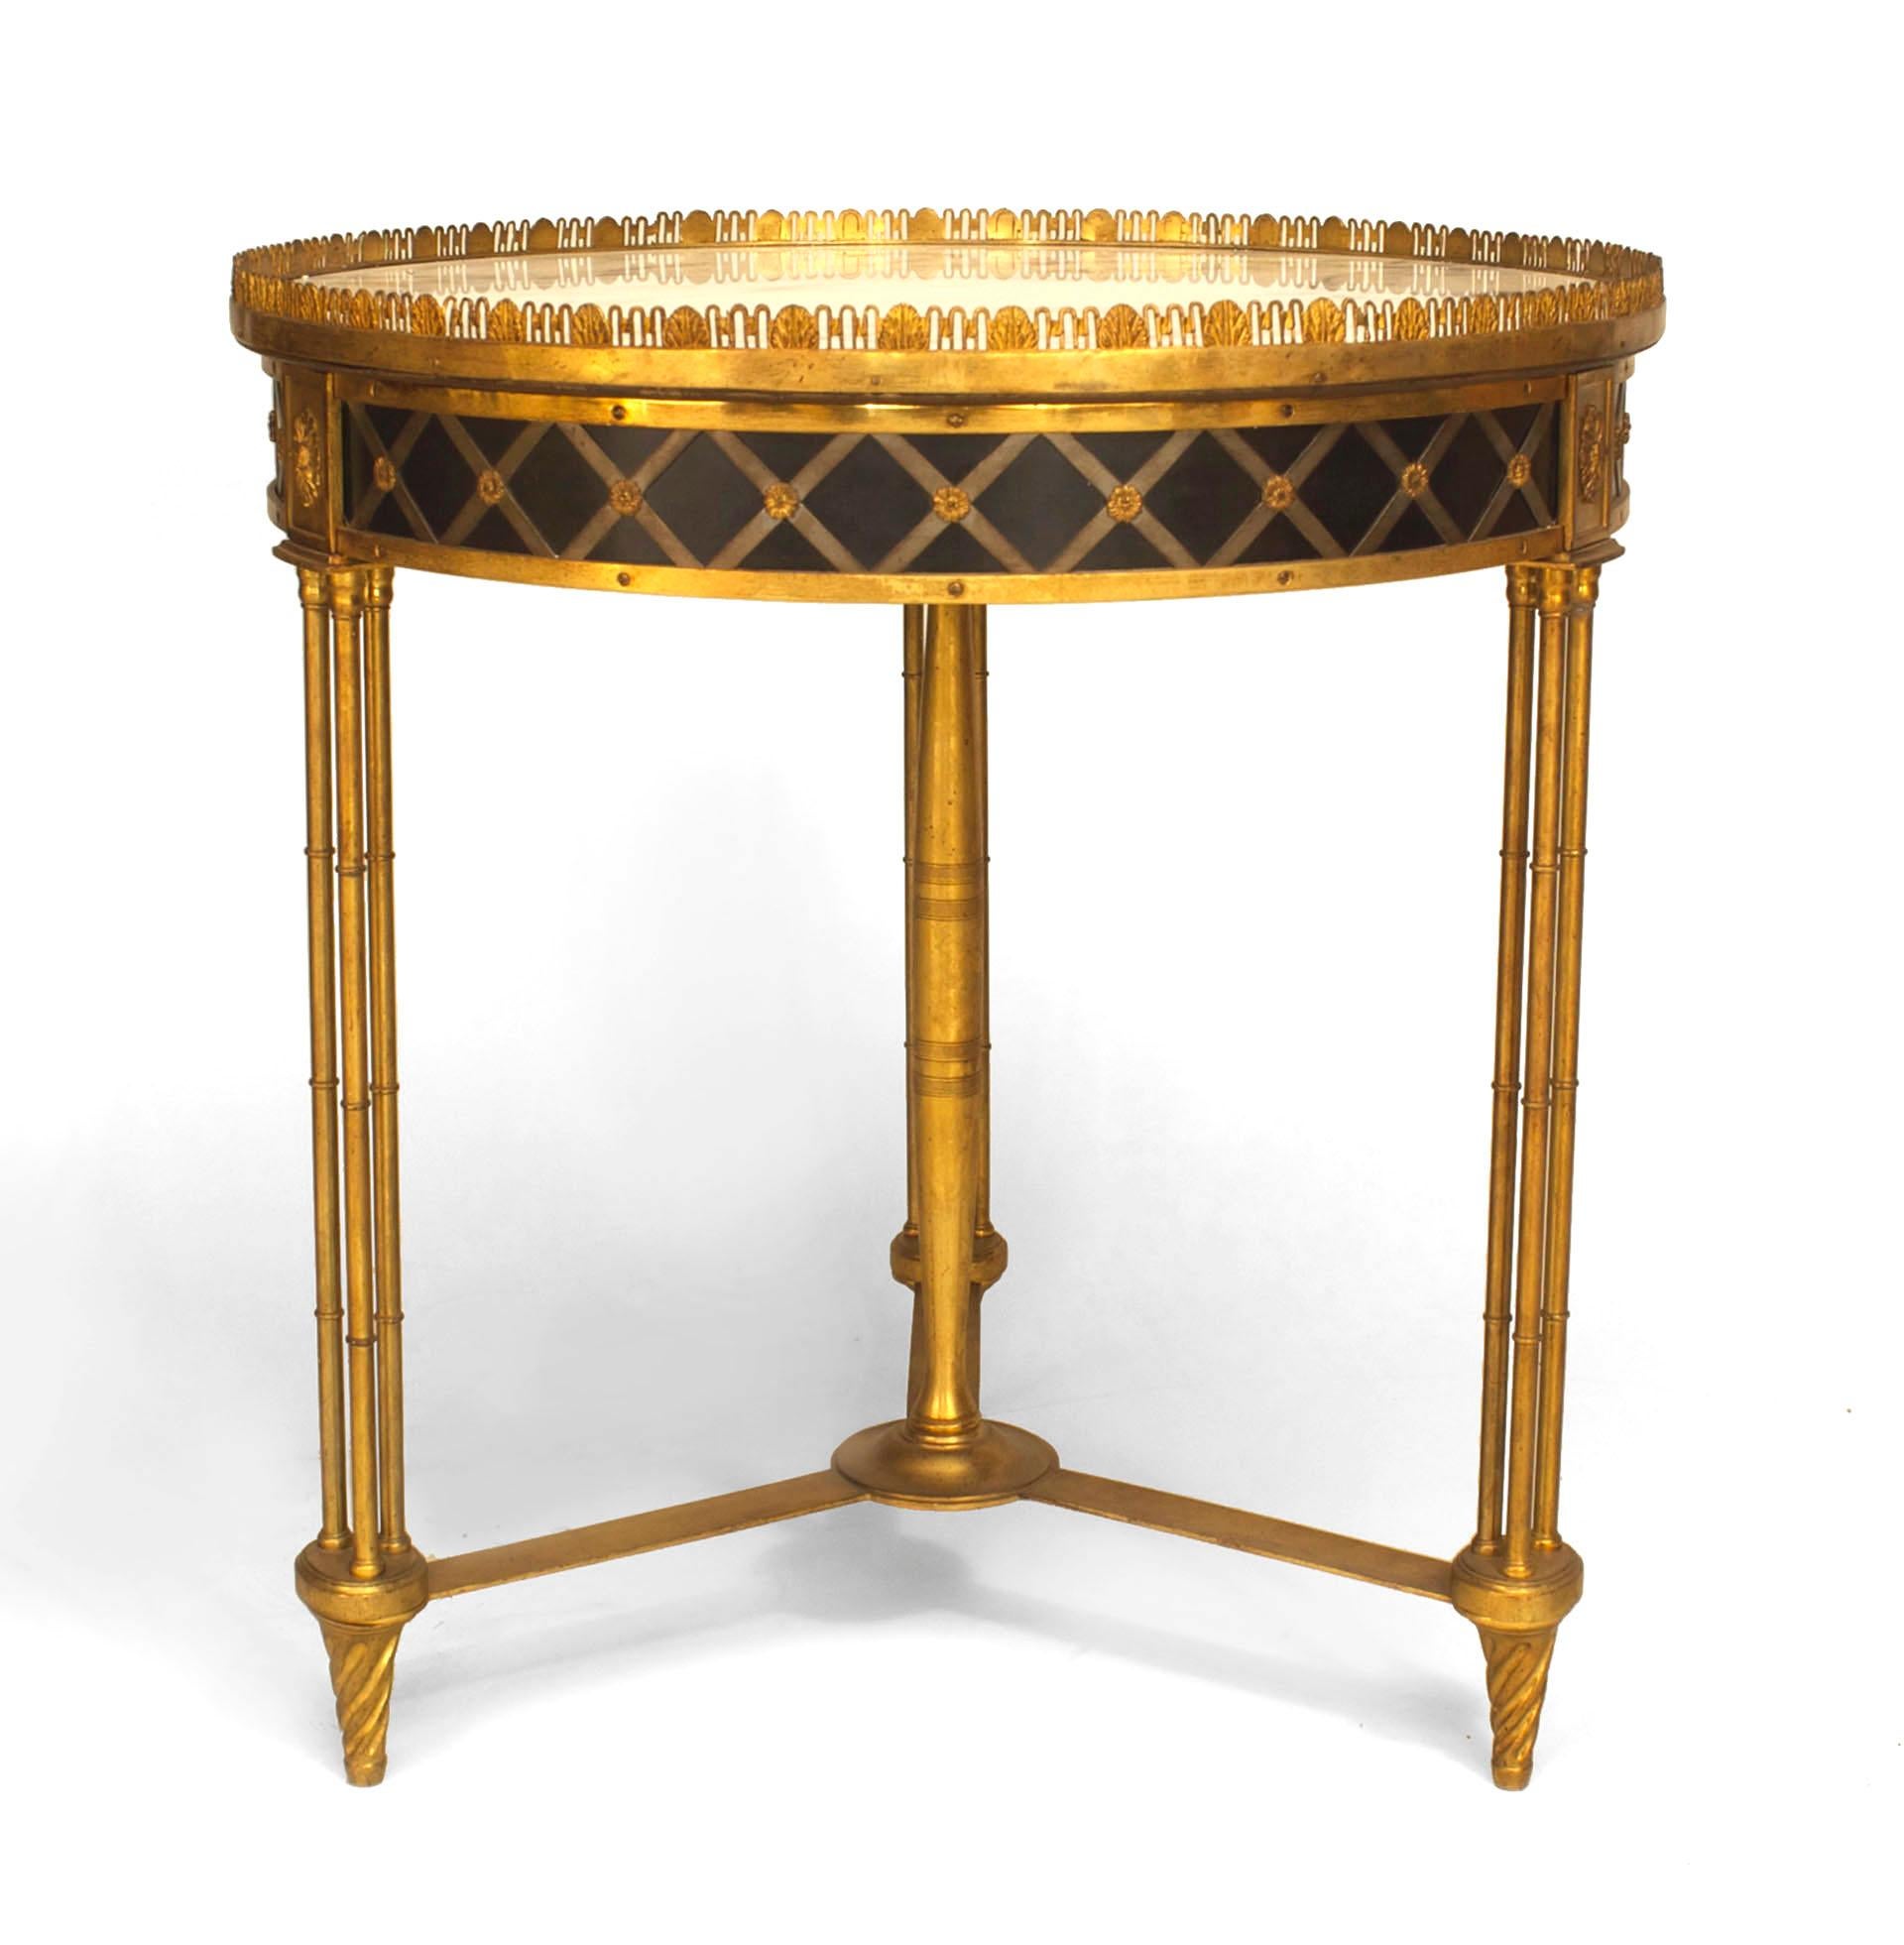 Twentieth century French Charles X style bronze dore gueridon end table with a round white marble top set within a filigree gallery above an x-design apron, three faux bamboo legs, and a finial stretcher.